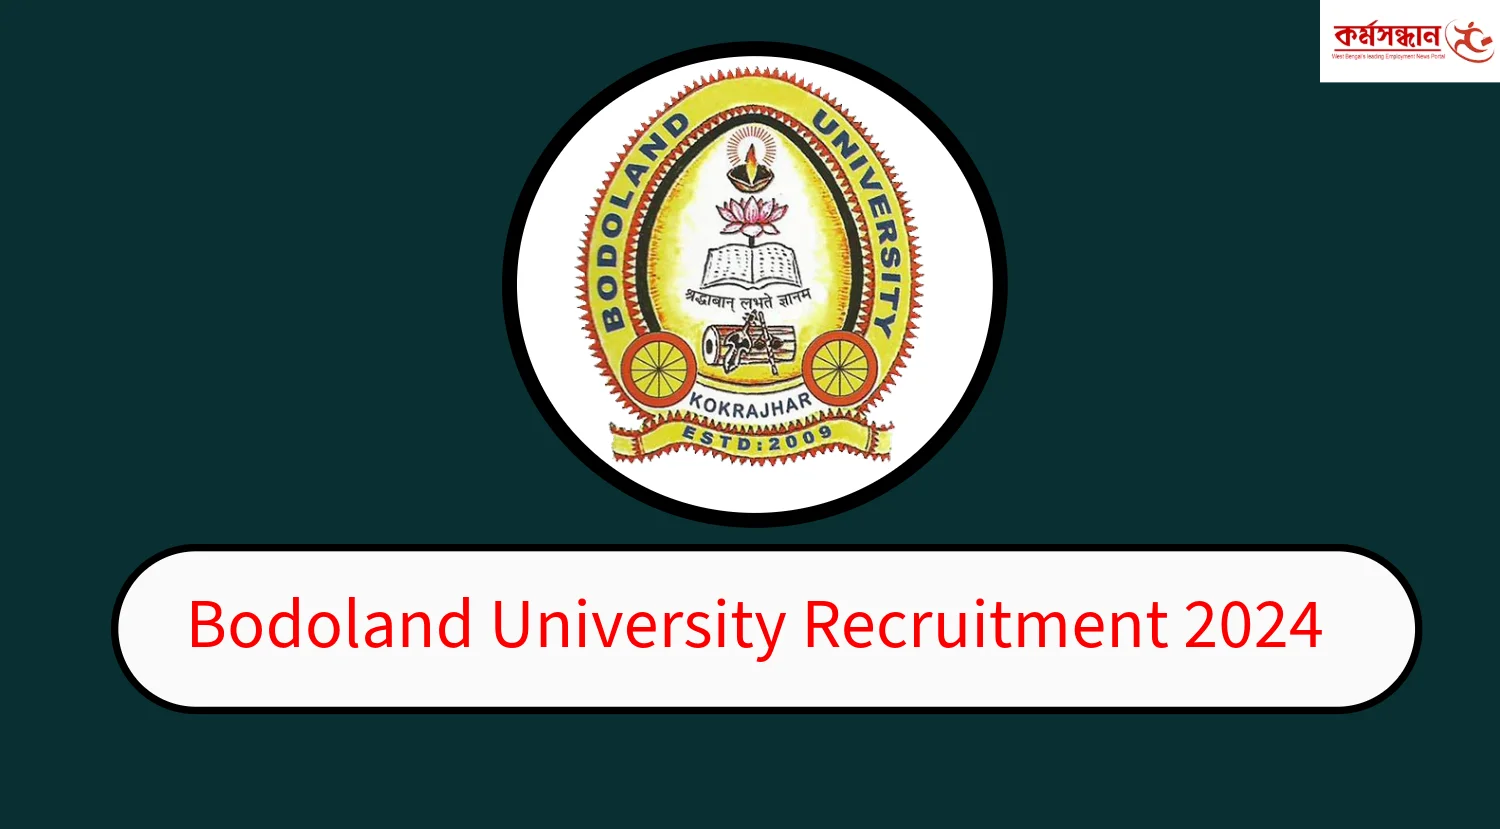 BODOLAND UNIVERSITY PG ADMISSION 2020: SUBMIT UG 6TH SEMESTER  MARKSHEET/CERTIFICATE TO CONFIRM YOUR ADMISSION - BodolandJobNews.Com::  Latest Bodoland Jobs and Bodoland Job News from the heart of Bodoland